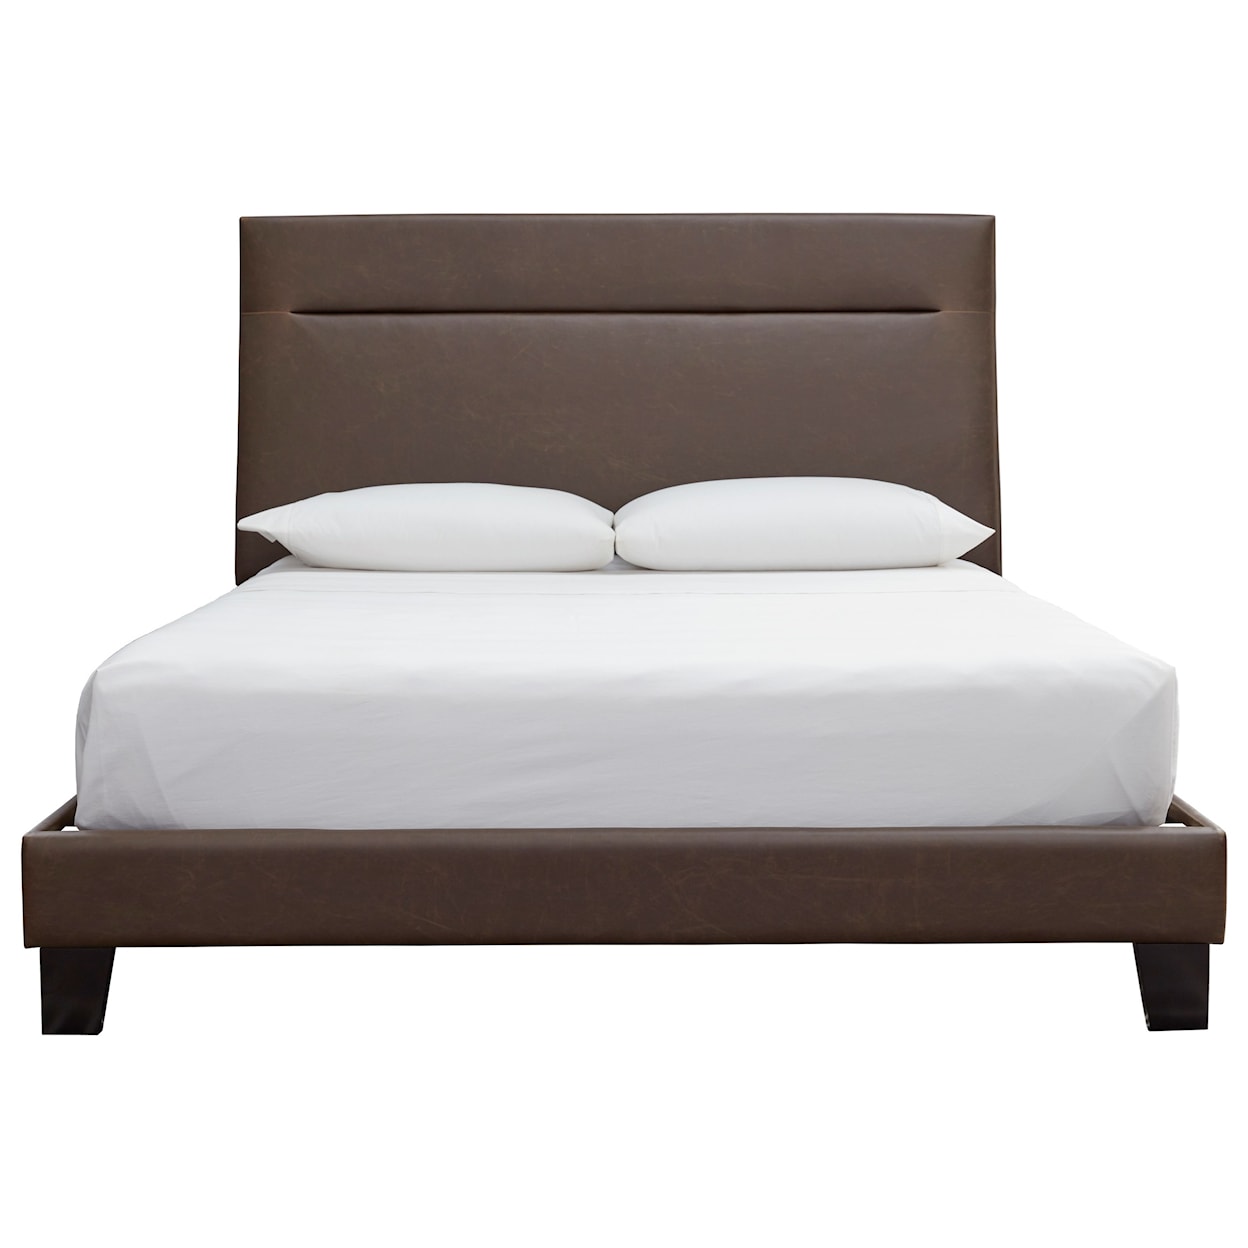 Signature Design Adelloni King Upholstered Bed